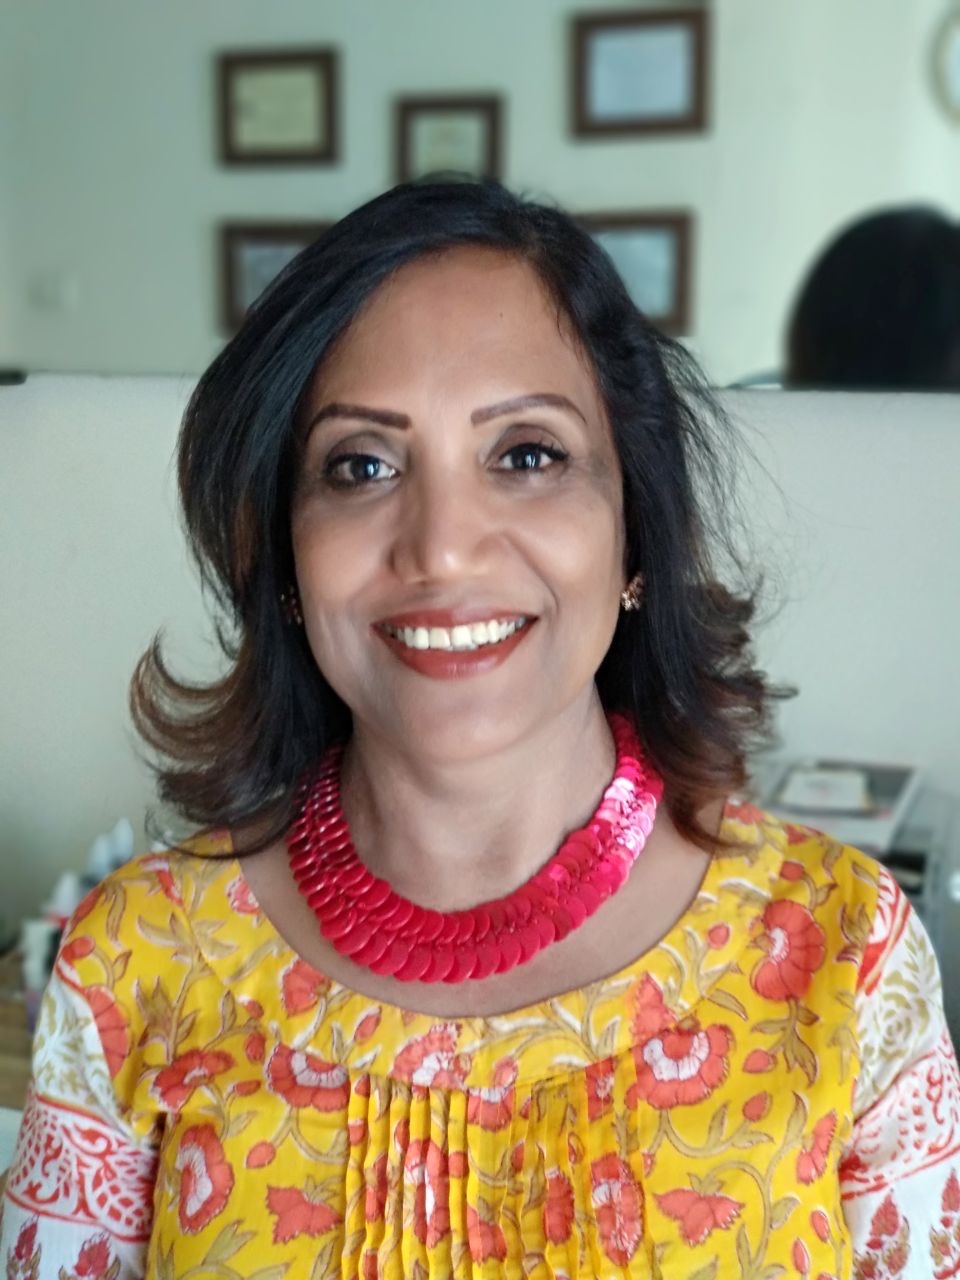 Lalitha Ravindran is the founder of First Forays Literary Agency, and is judging the Page Turner Writing Award in the hope of finding new writers to represent.